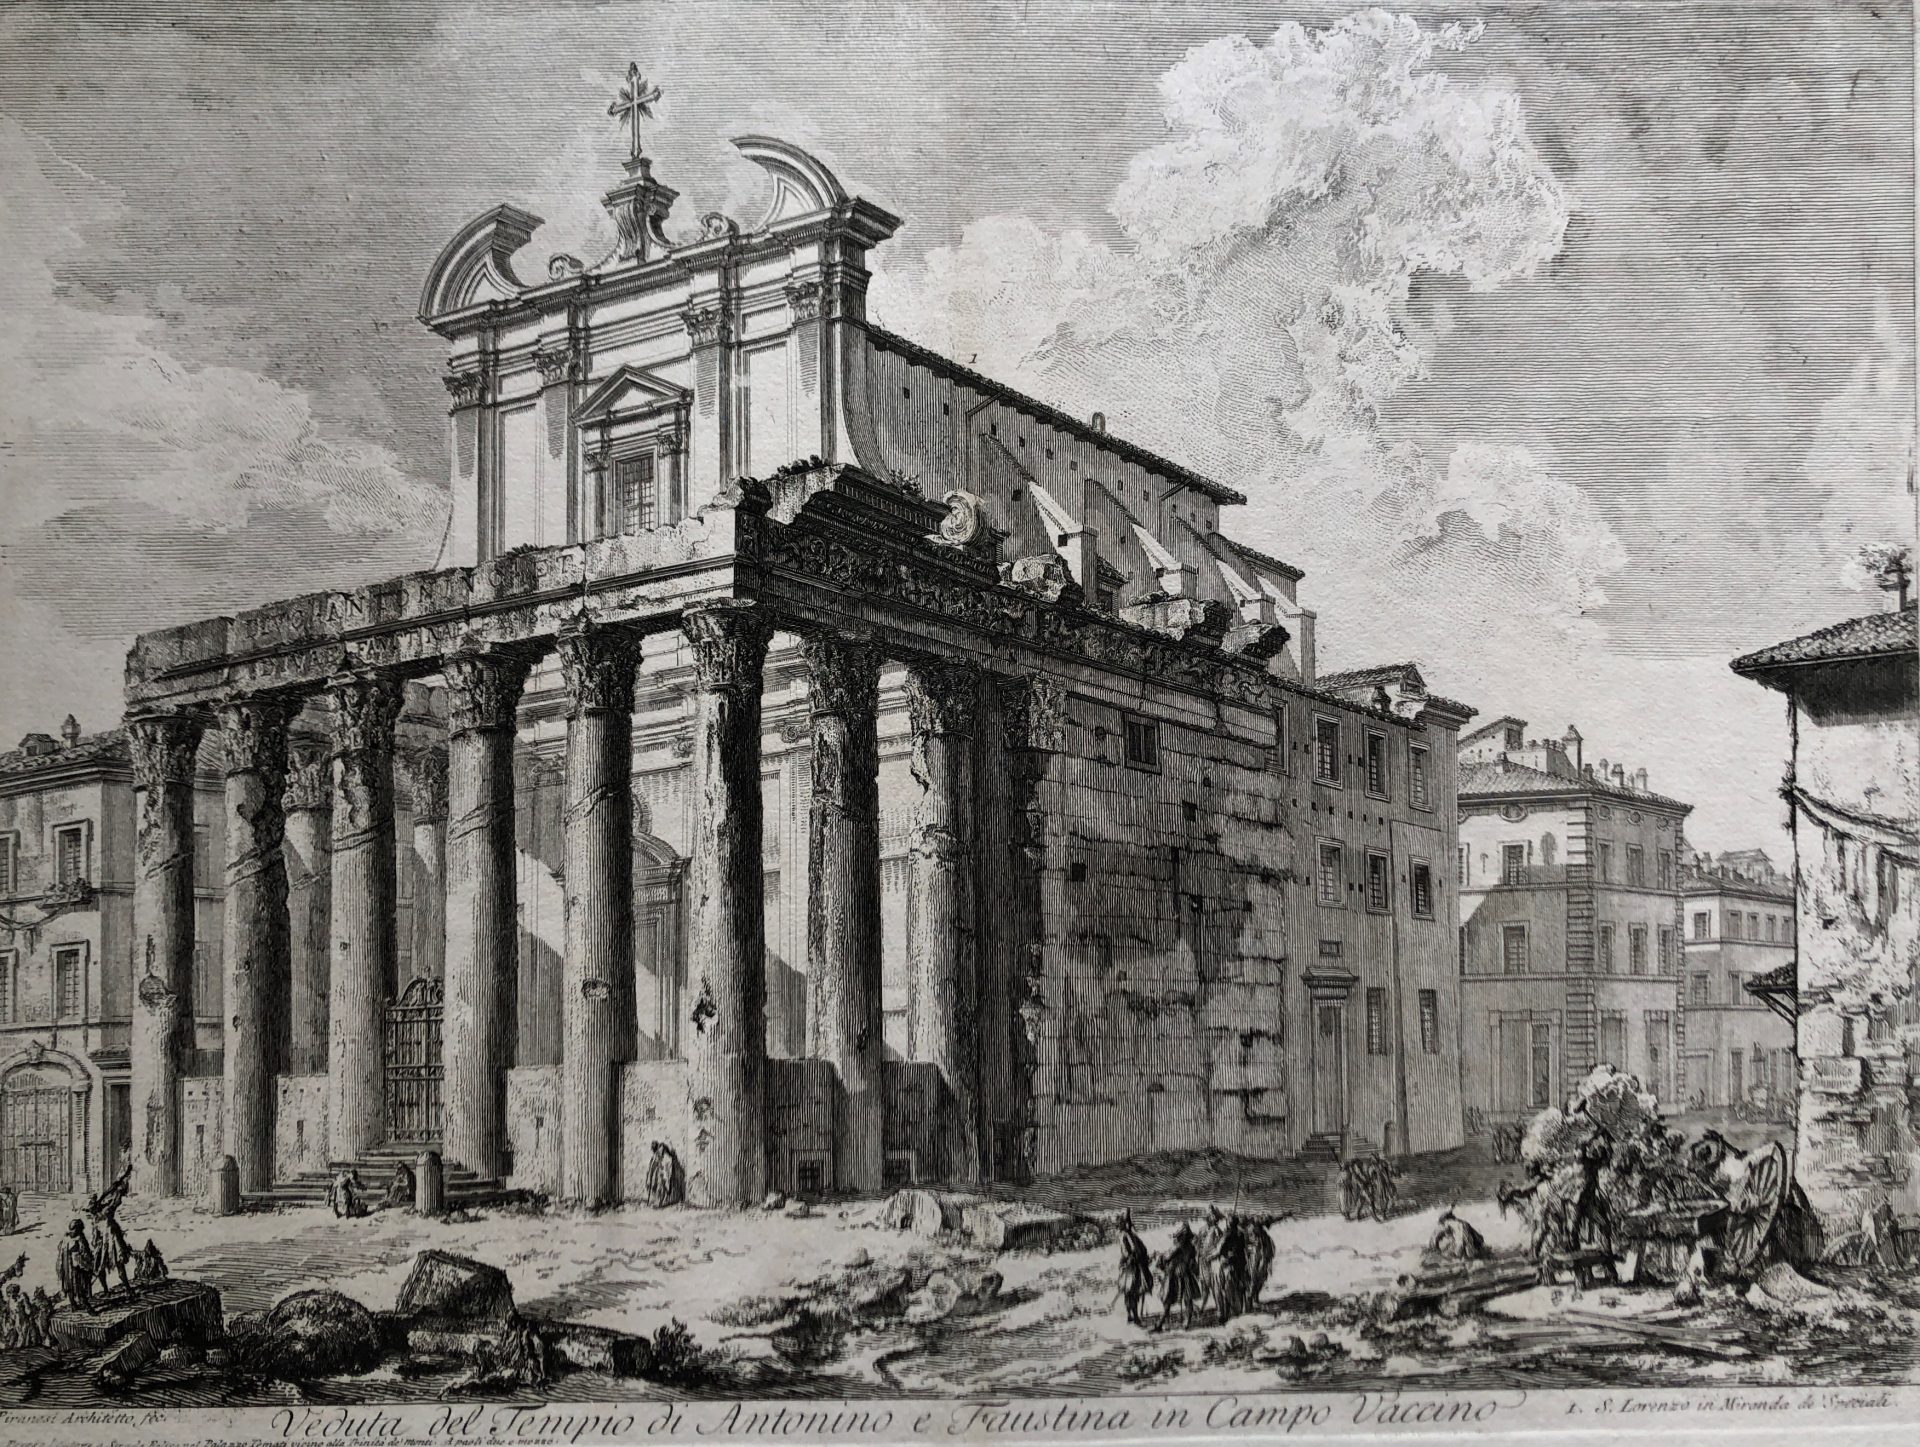 Giovanni Battista Piranesi, View of the Temple of Antoninus and Faustina in the Forum, c 1750.